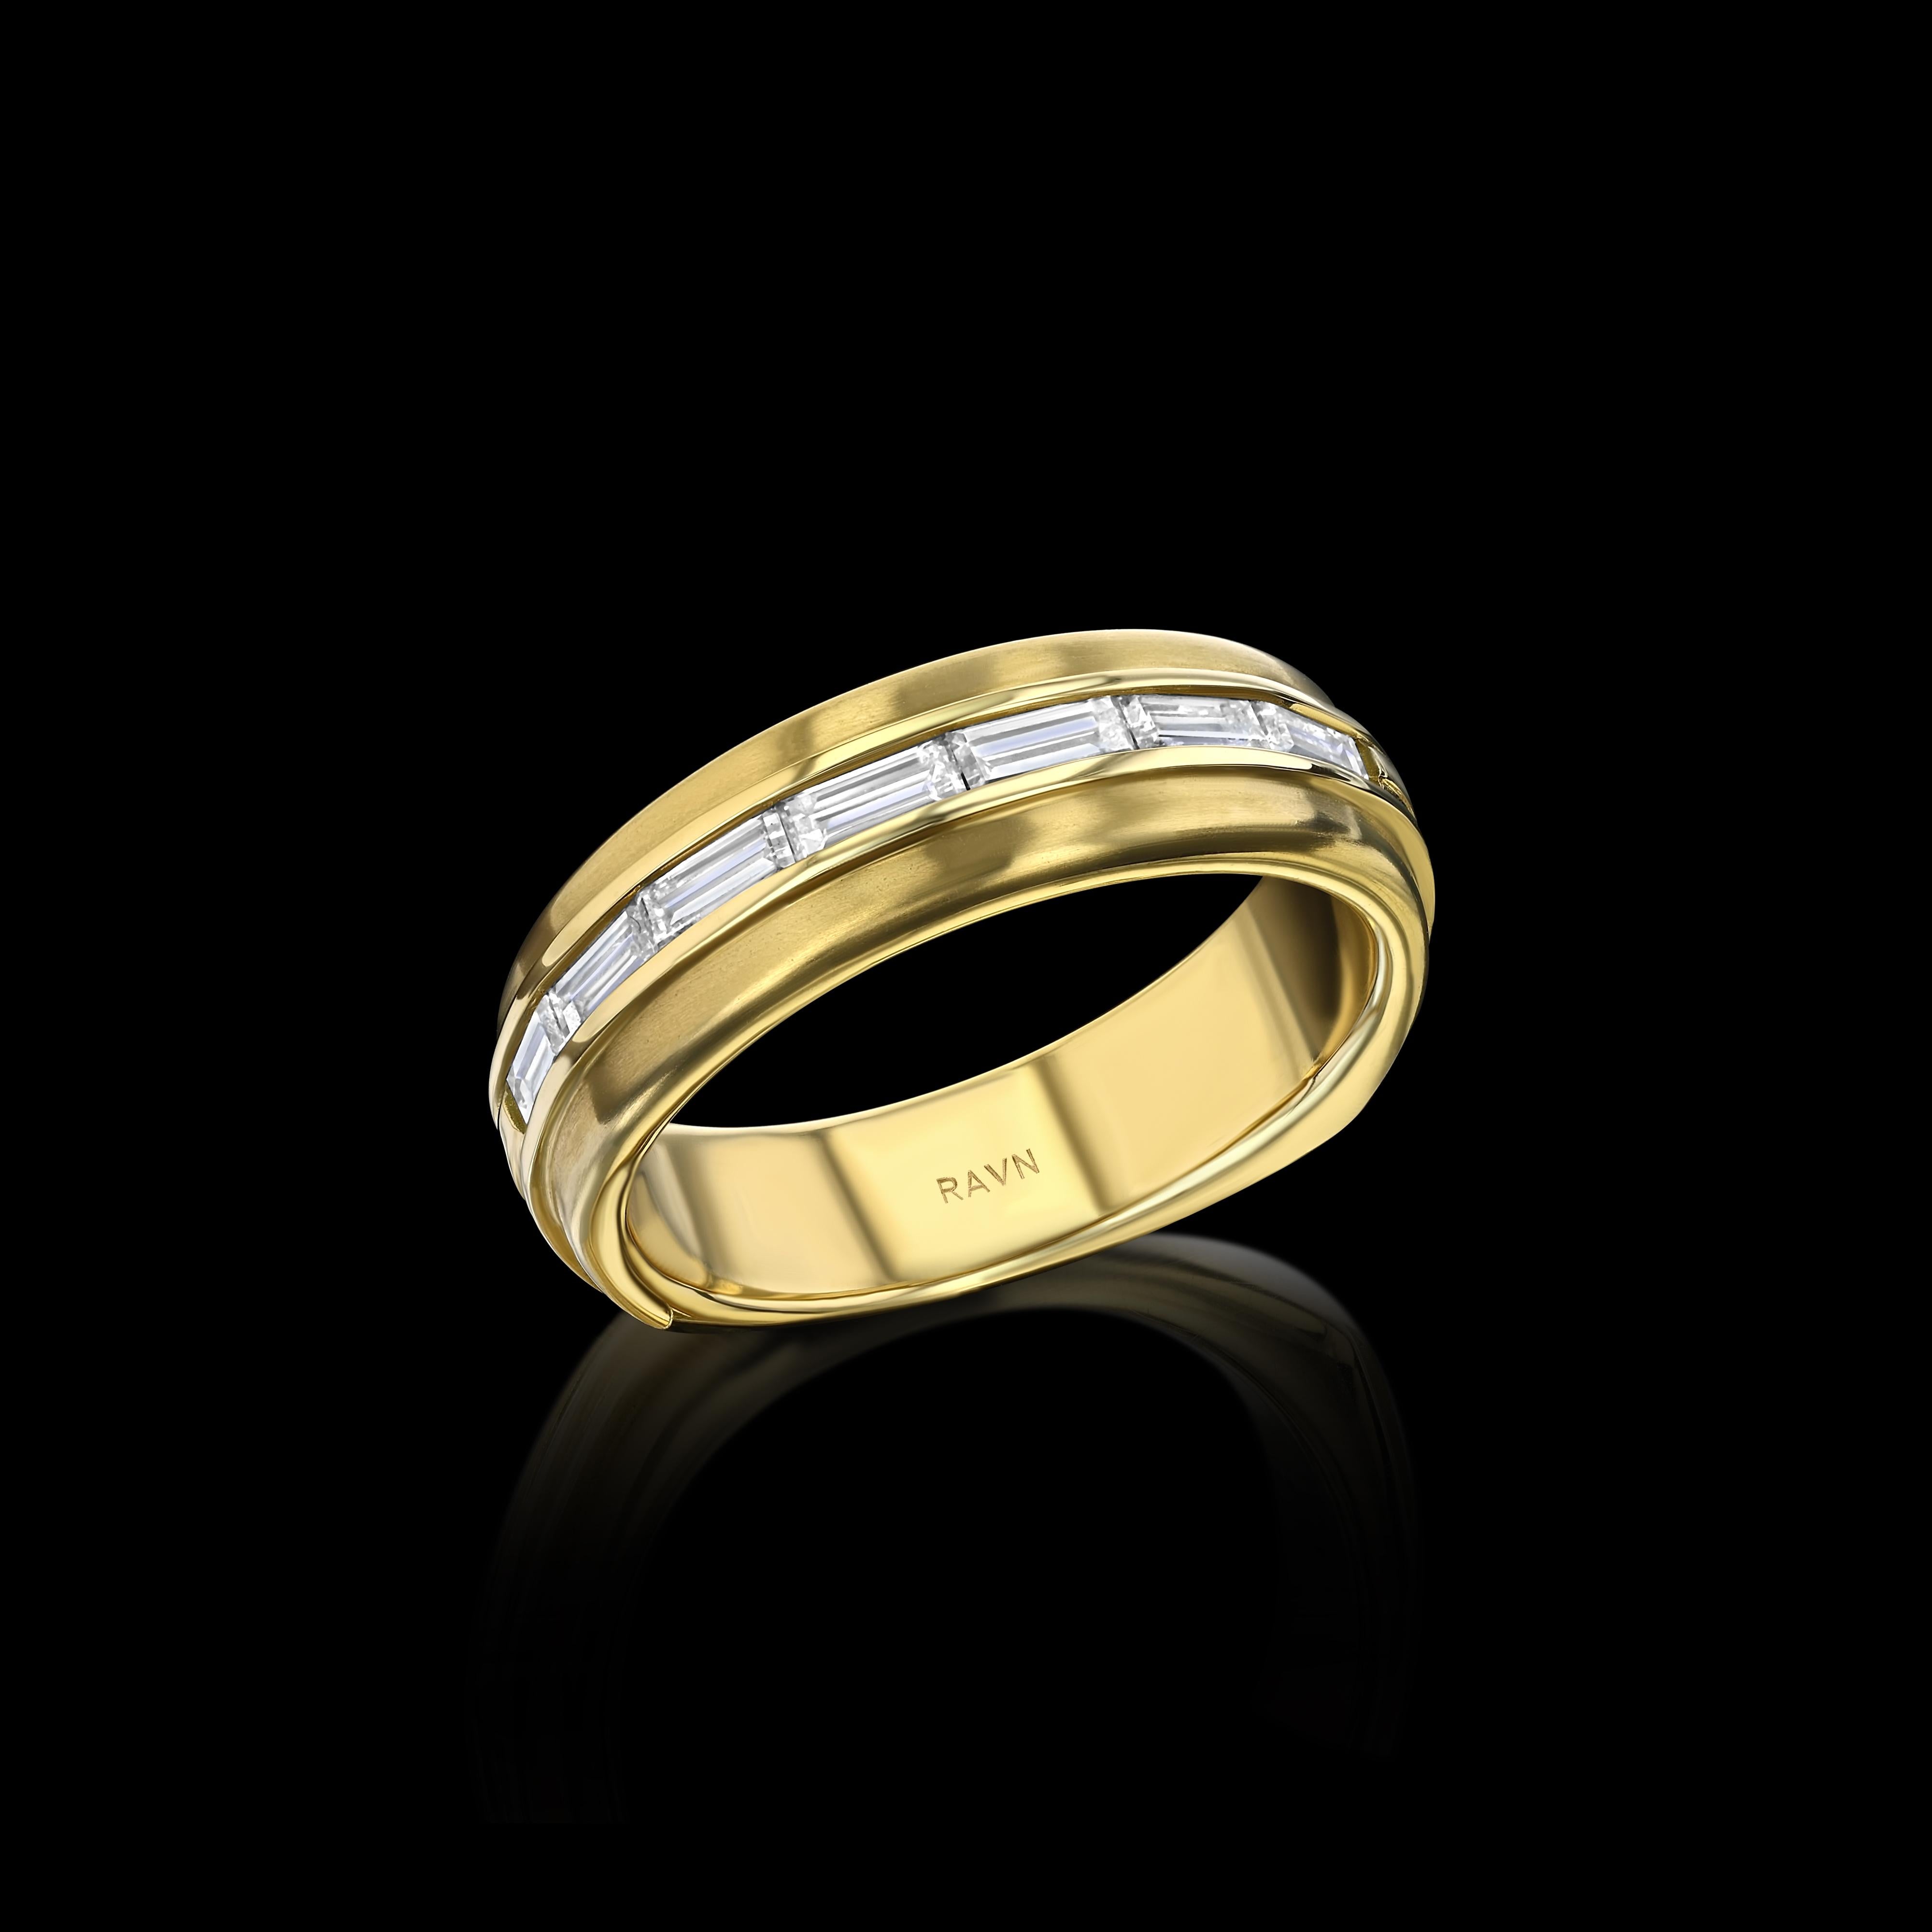 For Sale:  House of RAVN, 18k Yellow Gold, Men's Euro Band, with 7 Baguette Diamonds 2